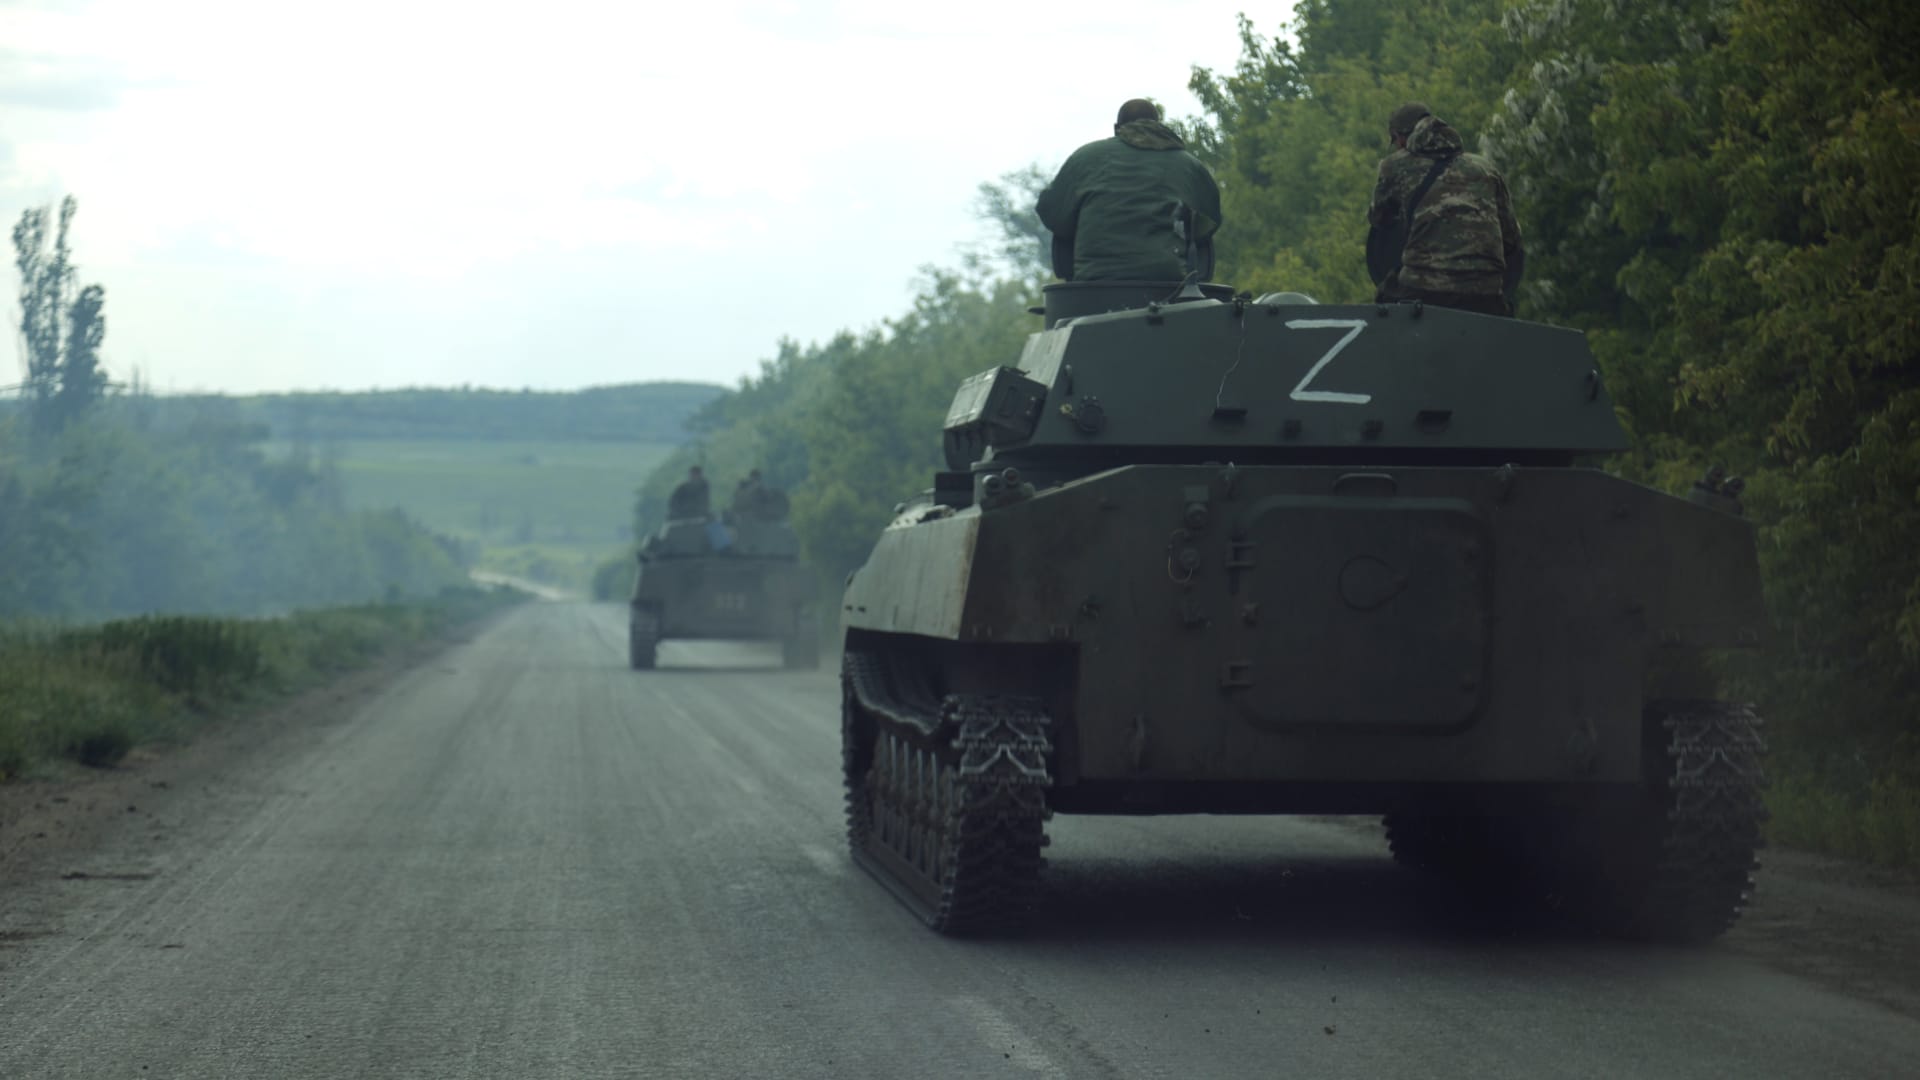 Military vehicles of the DPR army are seen in Yasynuvata, Donetsk Oblast, Ukraine on May 28, 2022. 